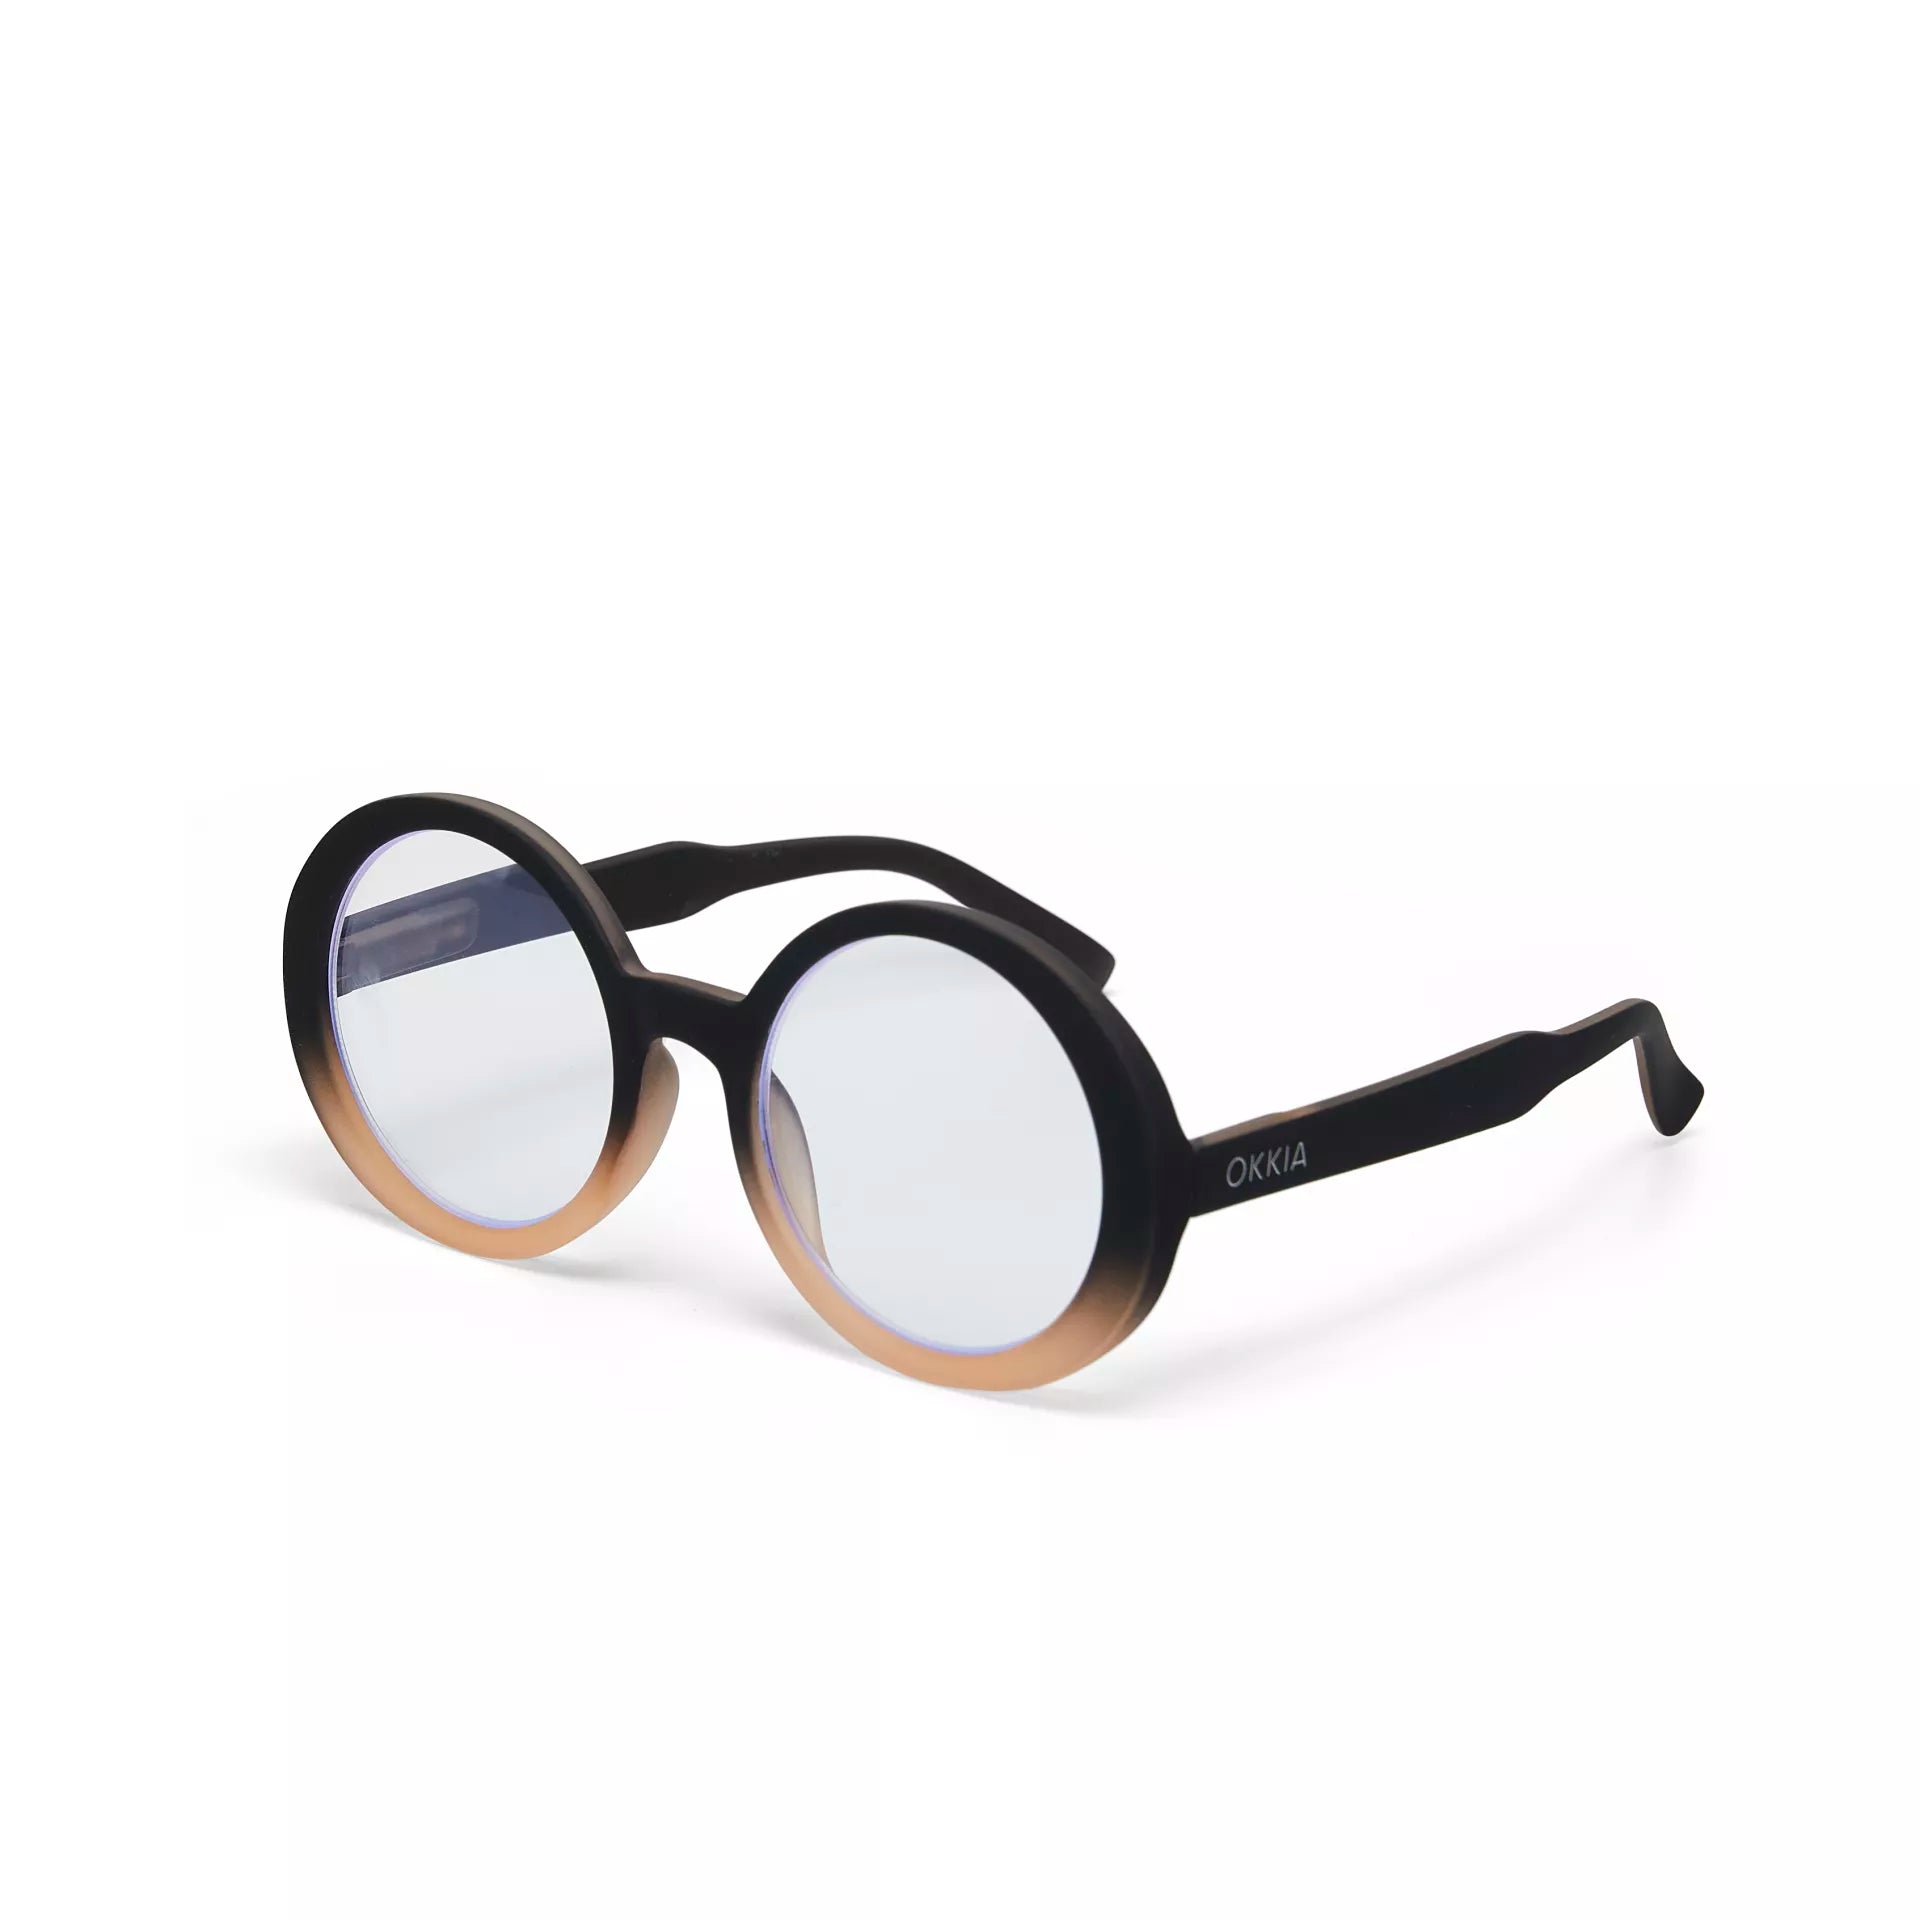 Fabulous Gifts Okkia Reading Glasses Tondo Black Rose 3.00 by Weirs of Baggot Street